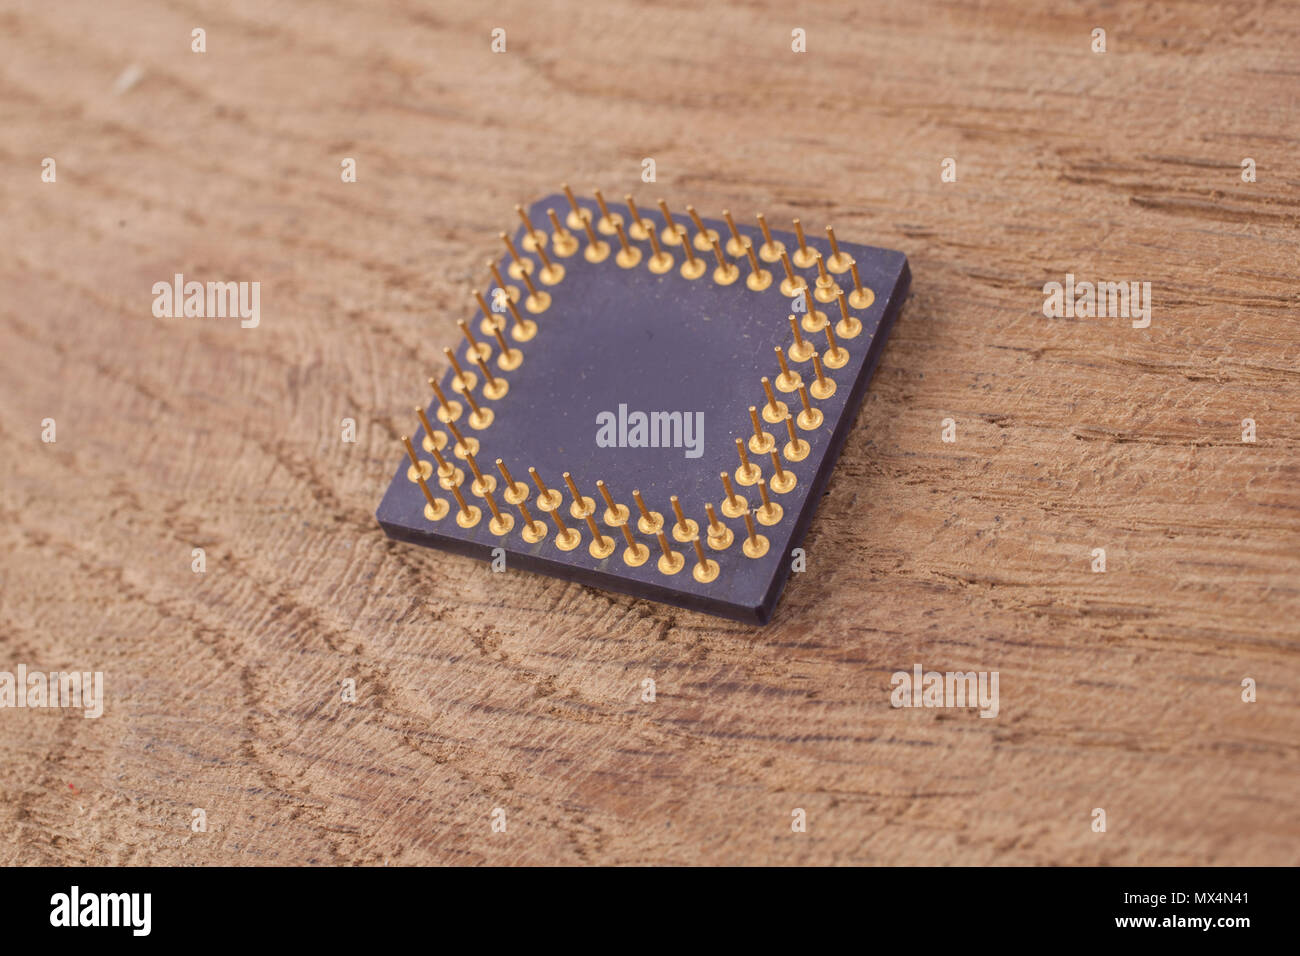 floating-point unit coprocessor Stock Photo